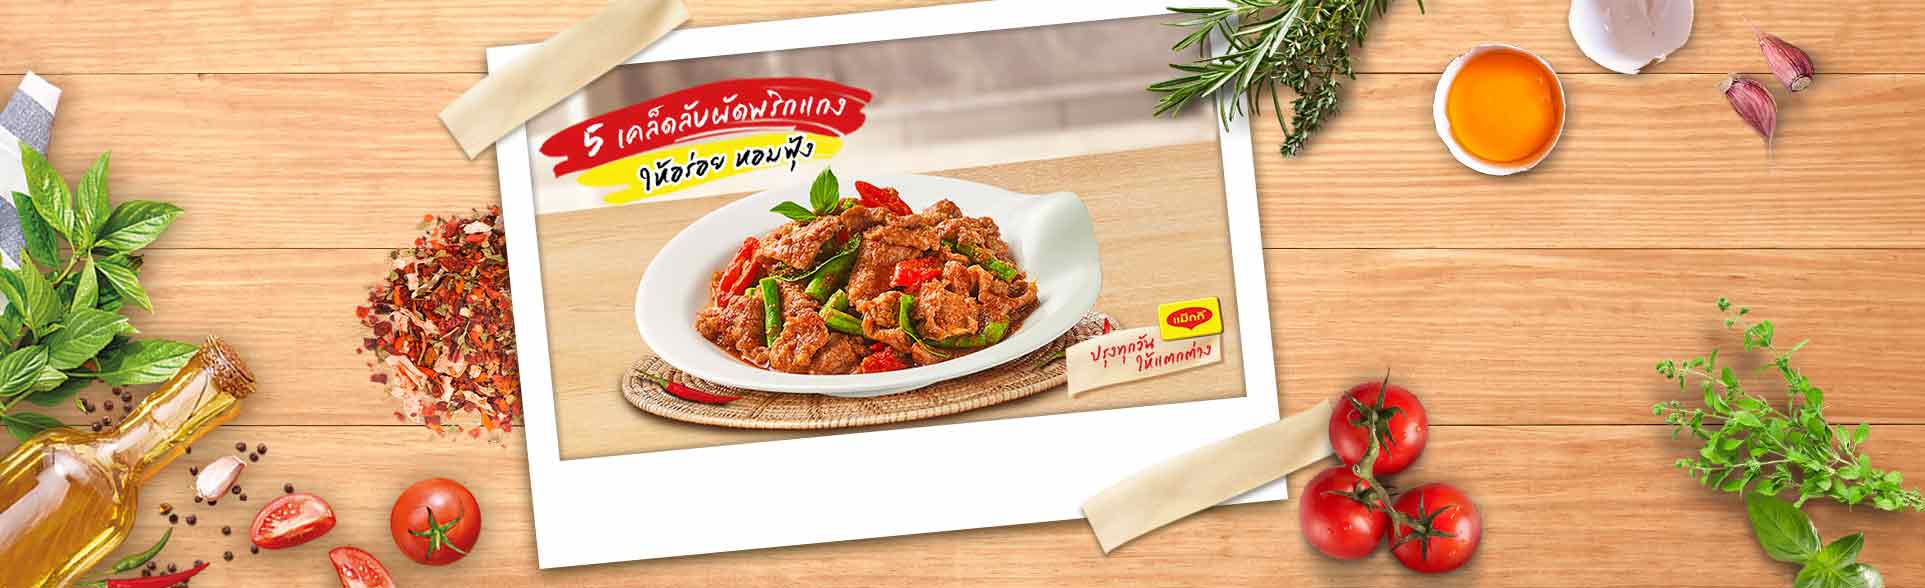 how-to-stir-fried-red-curry-paste-banner